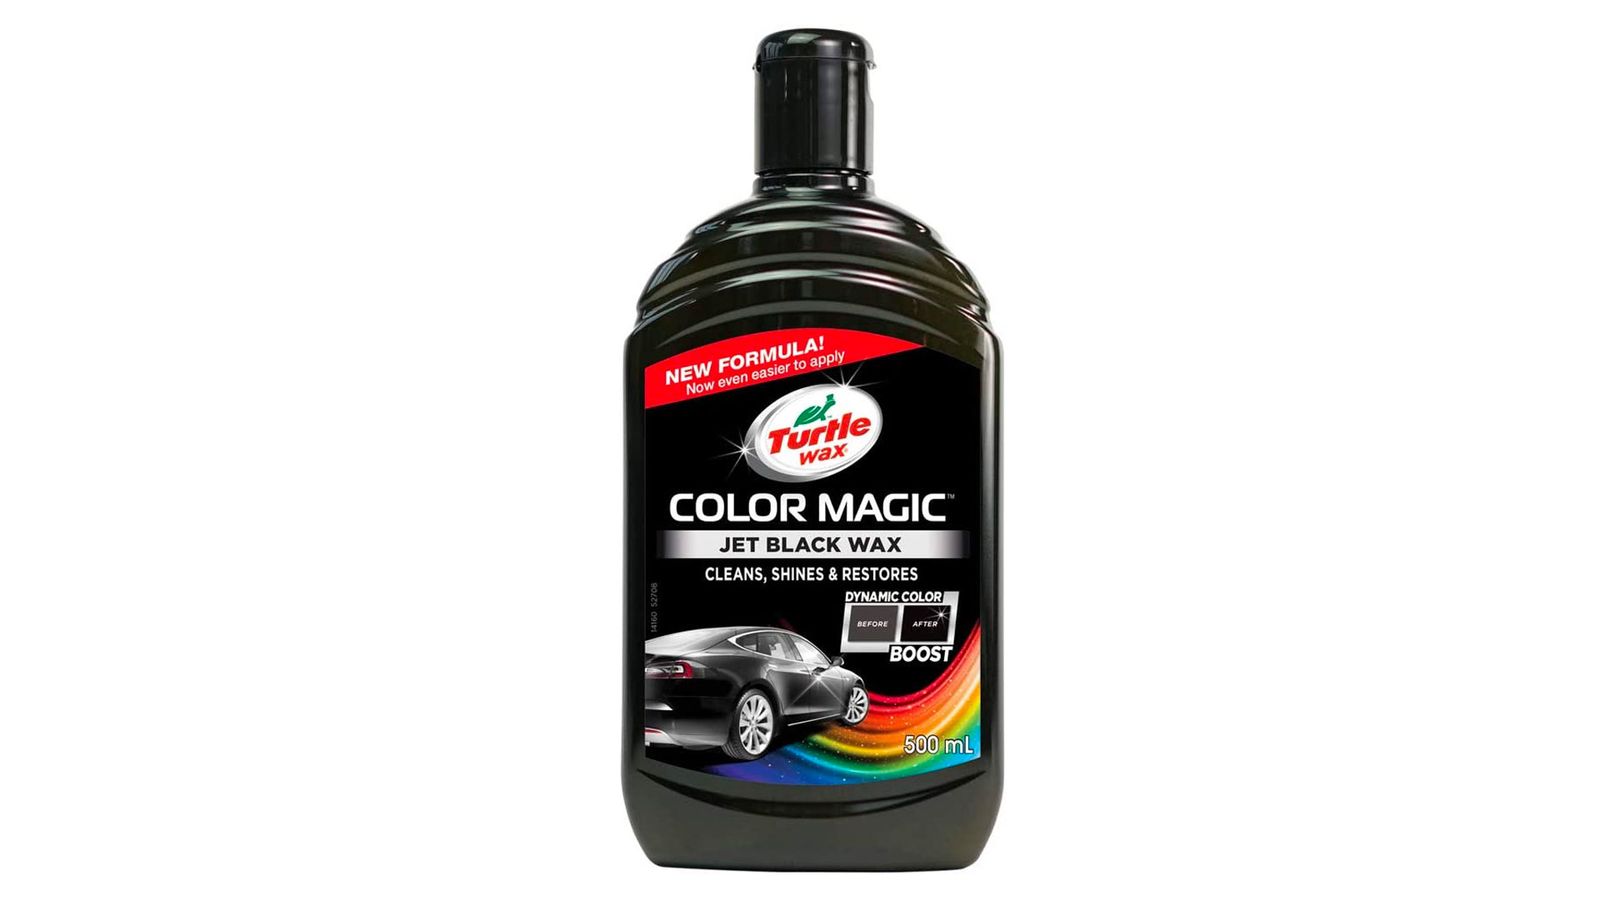 Turtle Wax Colour Magic product image of a black bottle with a label featuring a black car and a rainbow pattern.